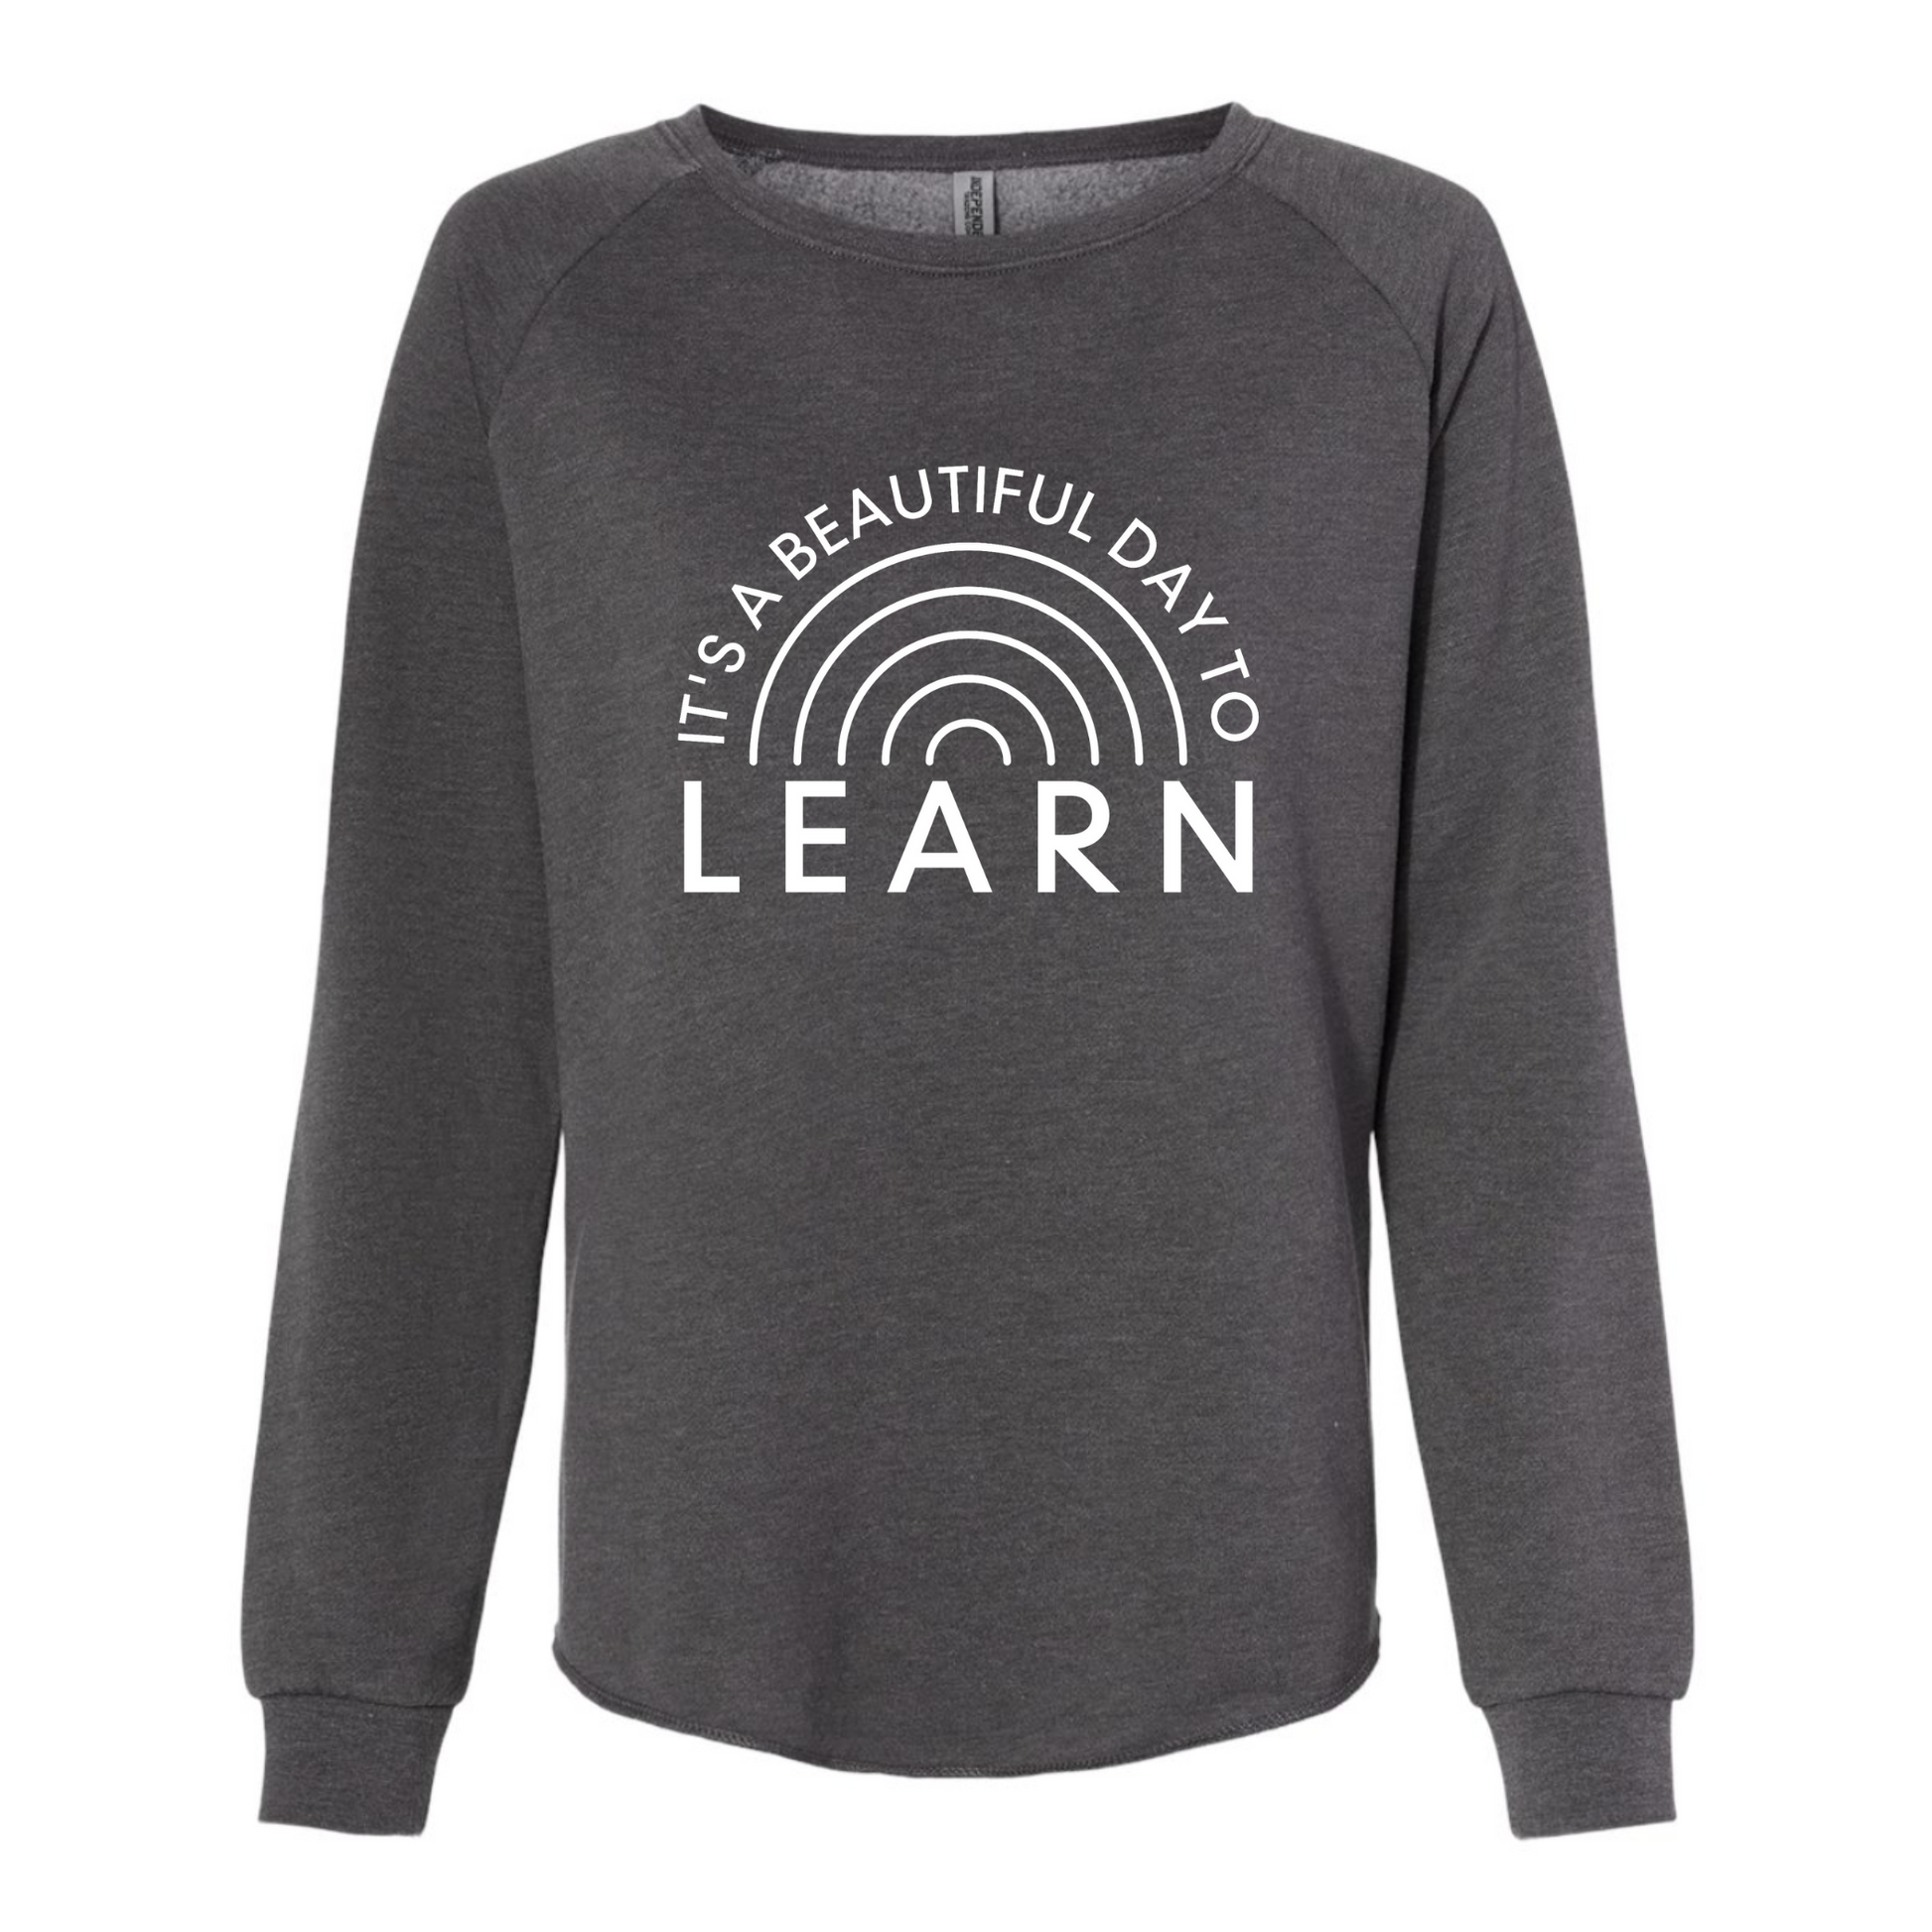 It's A Beautiful Day To Learn Crewneck Sweatshirt in gray - front view